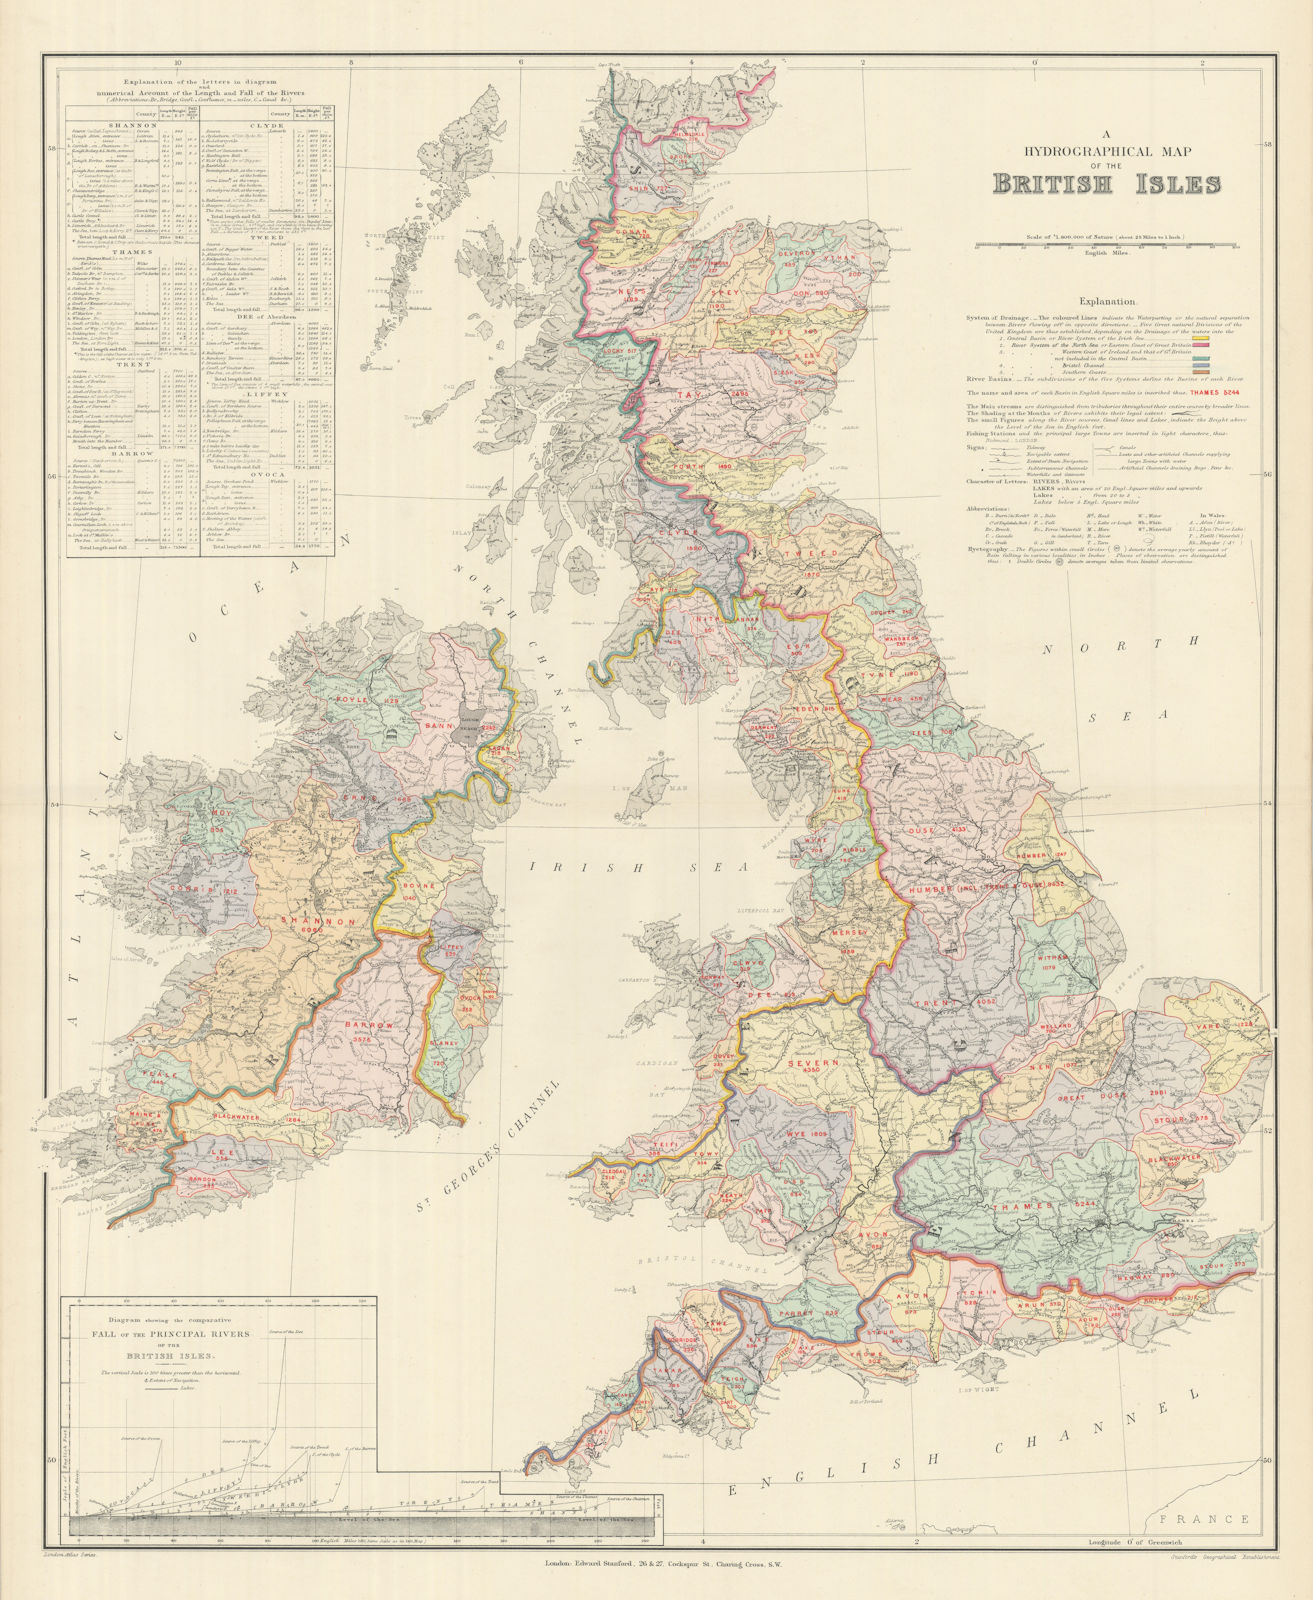 Associate Product British Isles hydrographical. Watersheds River drainage basins STANFORD 1894 map